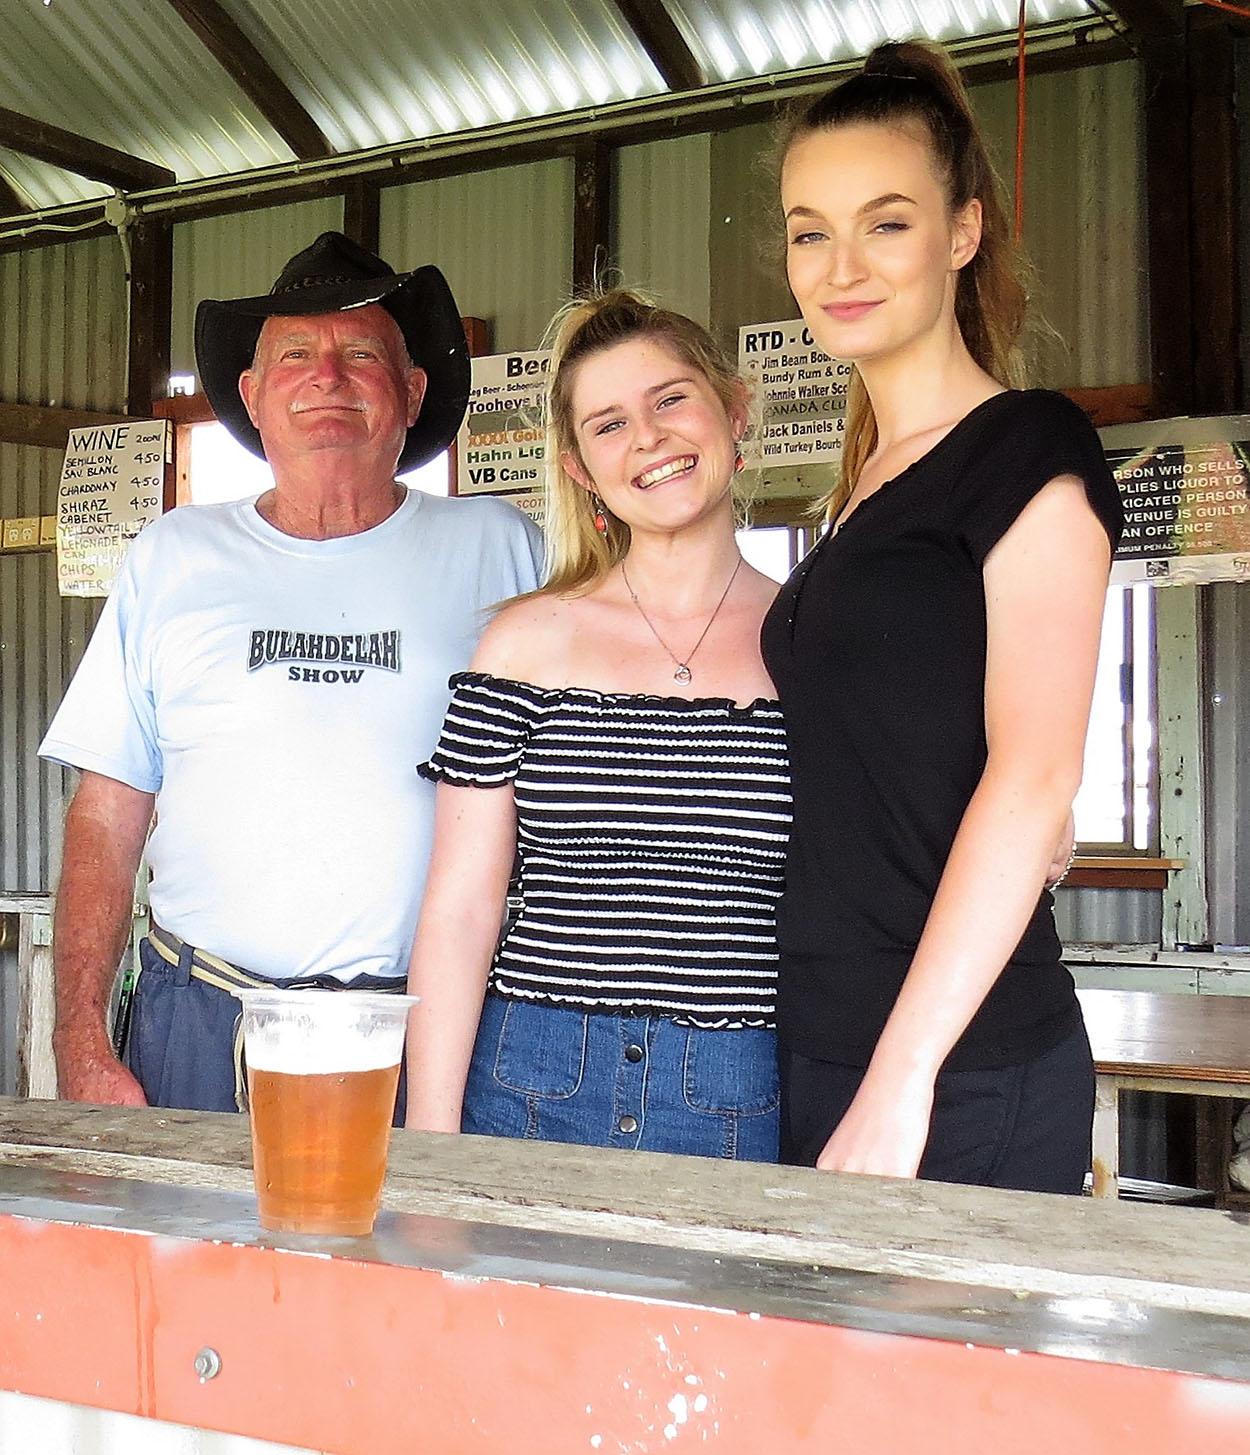 RENOVATED BAR SHED: Andrew Moncrieff, Chloe Shultz and Hannah Rietveld 